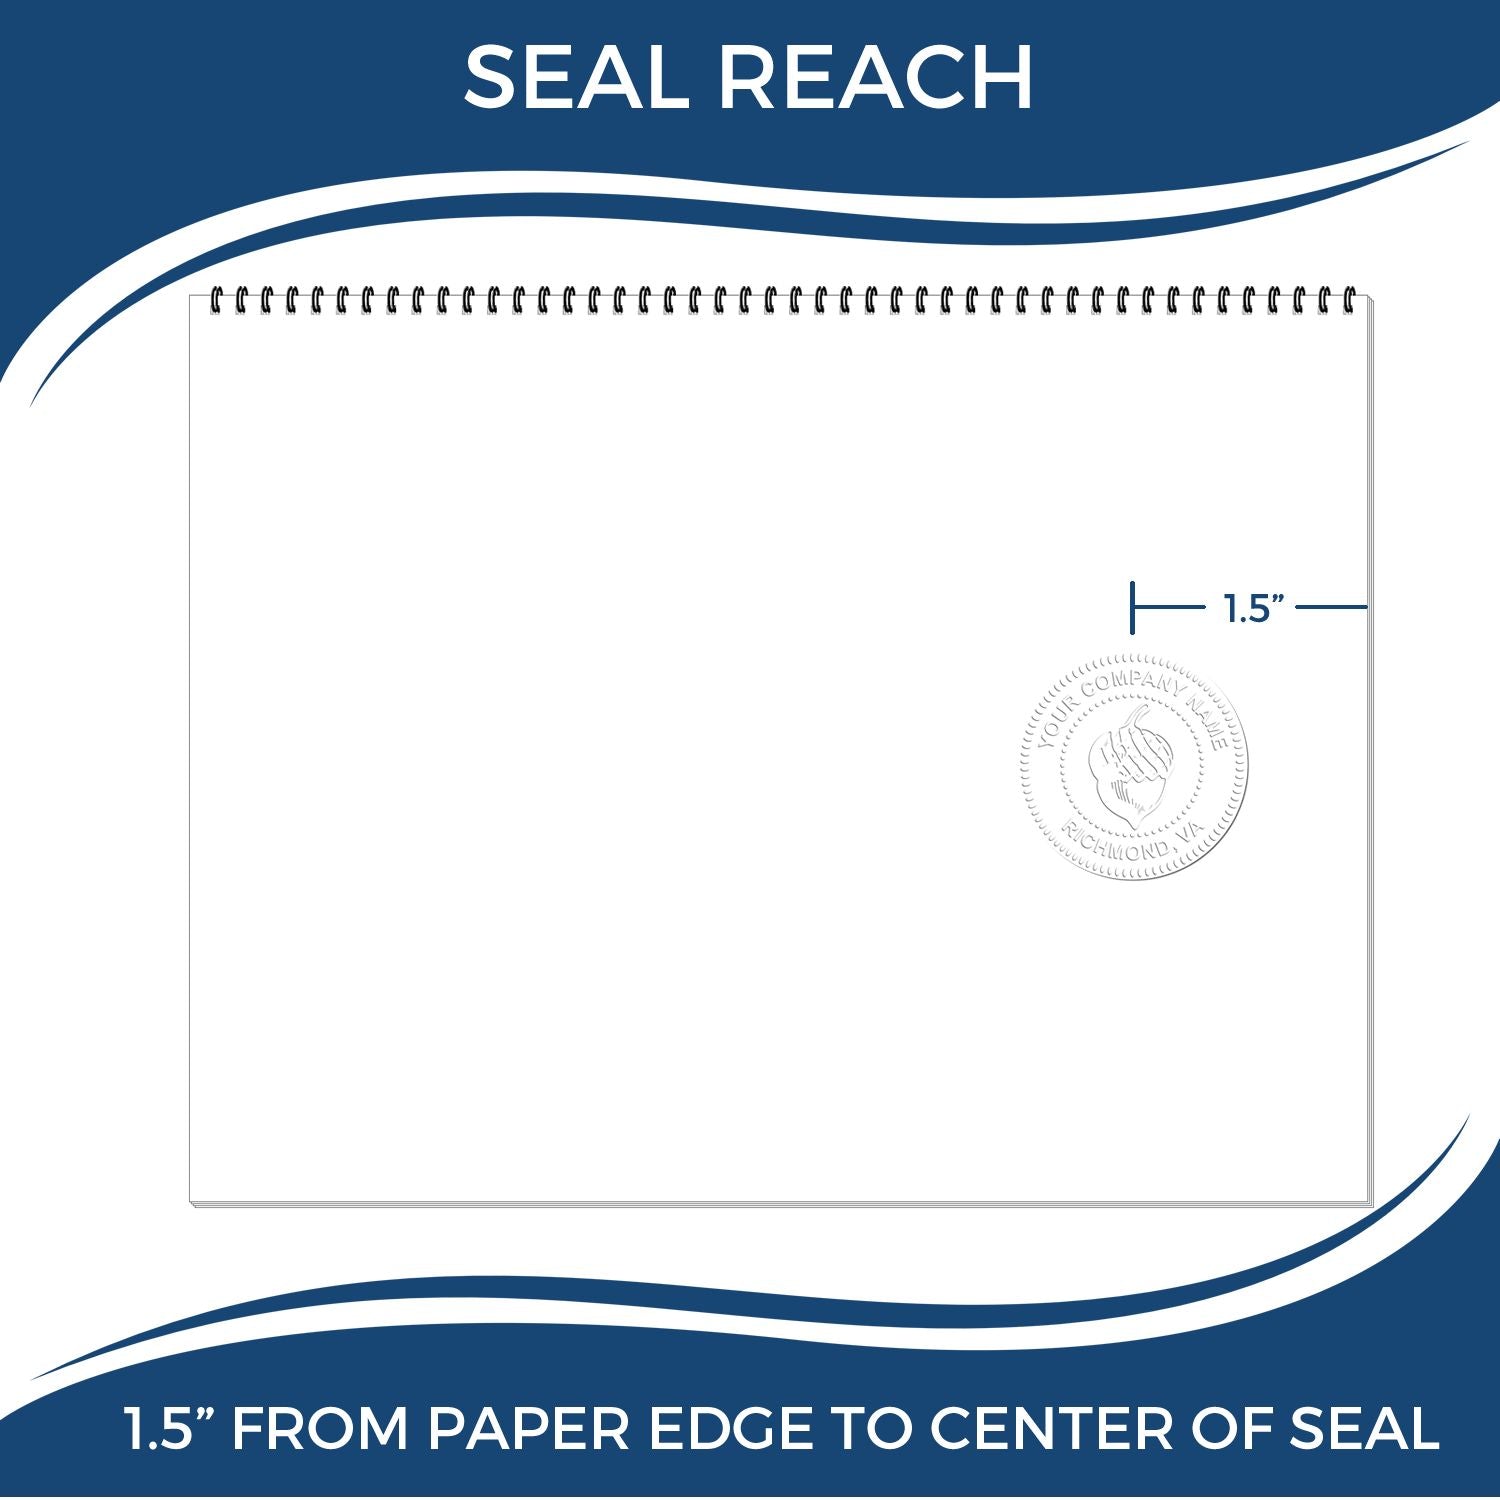 An infographic showing the seal reach which is represented by a ruler and a miniature seal image of the Virginia Desk Surveyor Seal Embosser